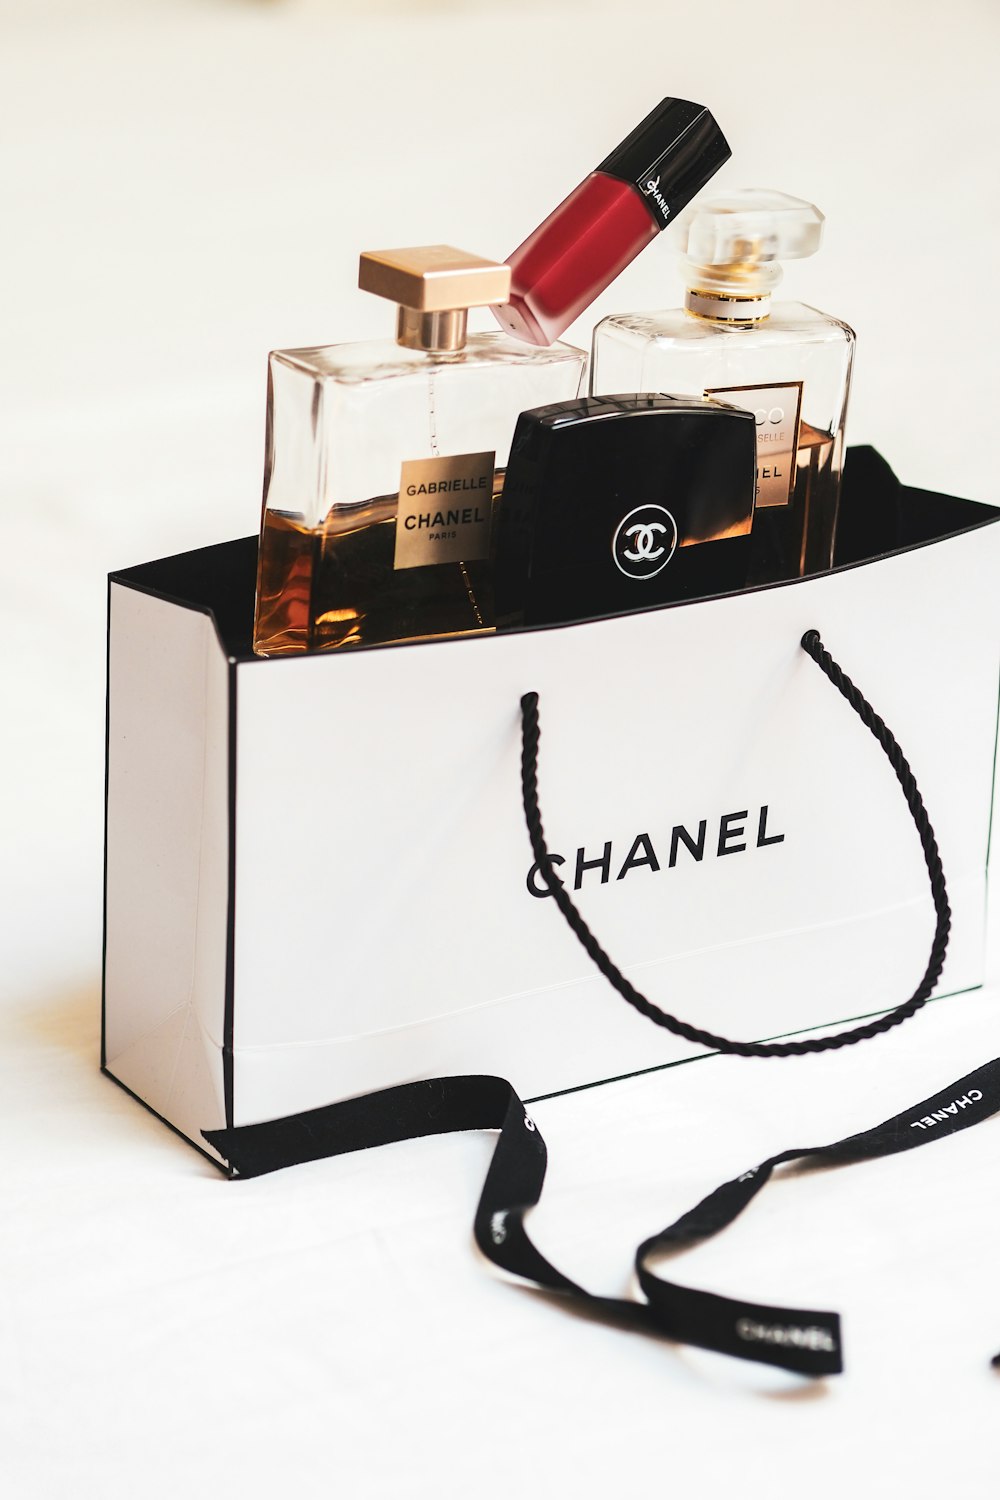 A chanel bag with a bottle of perfume in it photo – Free